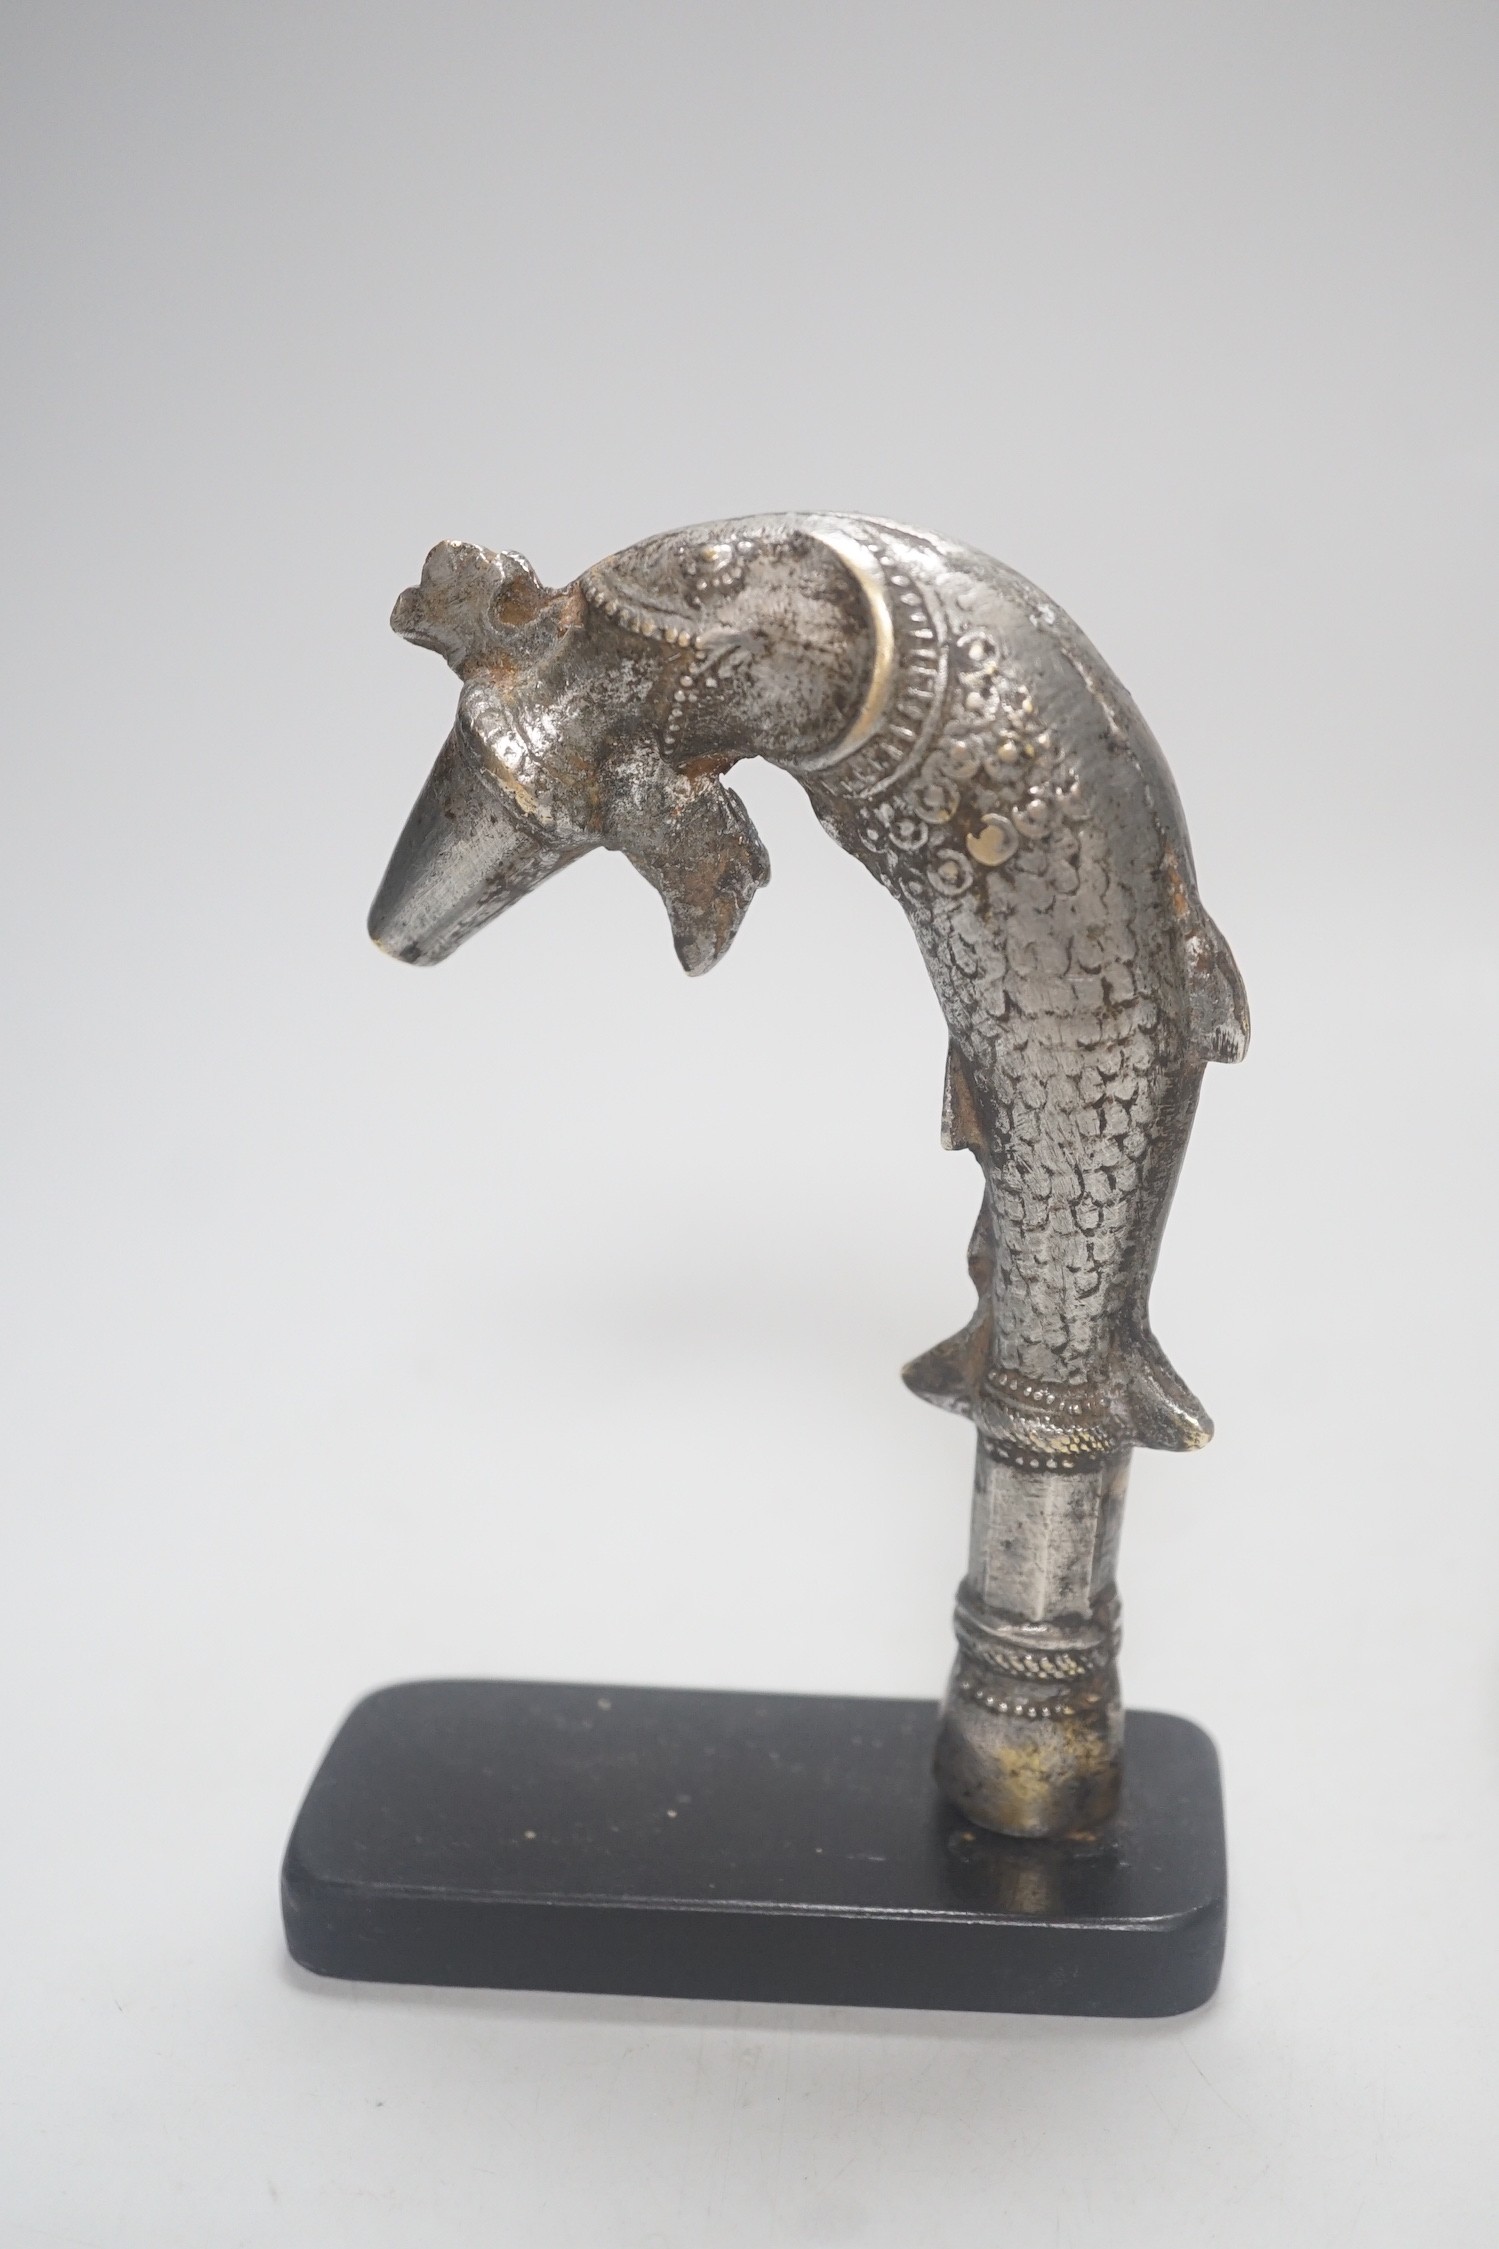 A Continental silvered and gilt metal inkwell, c.1900, and an Indo-Persian silvered bronze ‘fish’ tap or cane handle on stand, 16cm